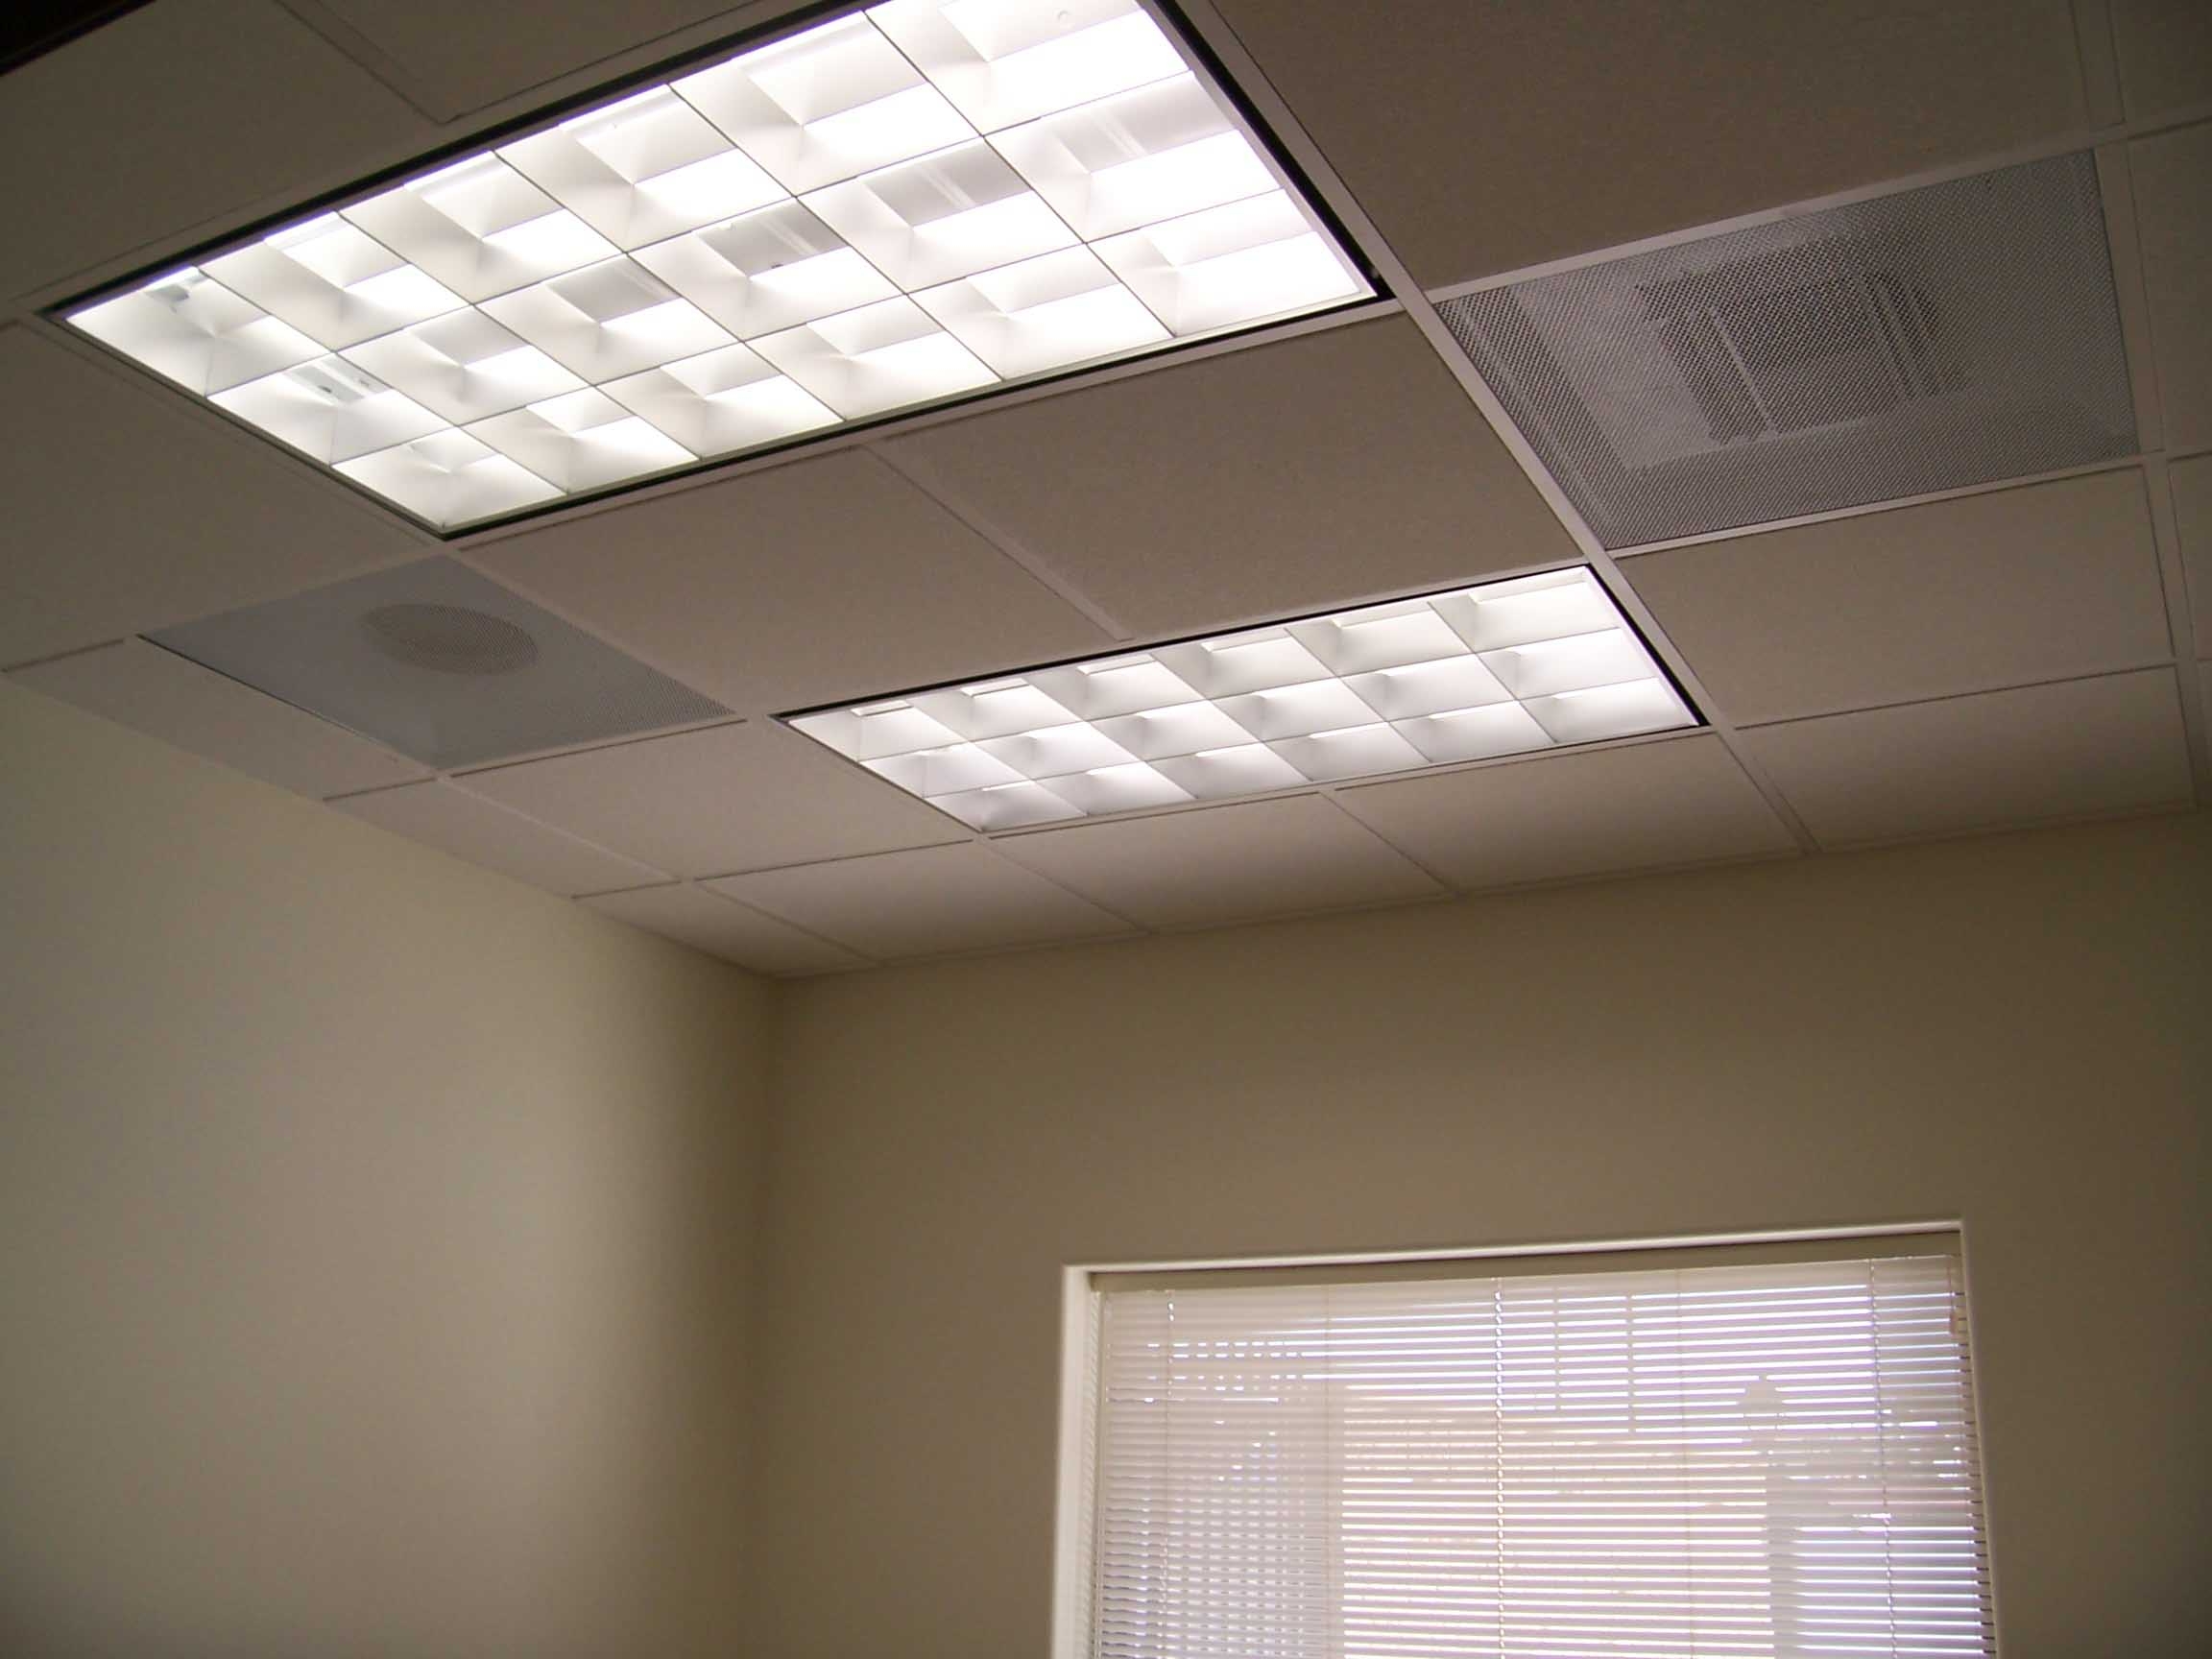 Permalink to Fluorescent Light Ceiling Tiles